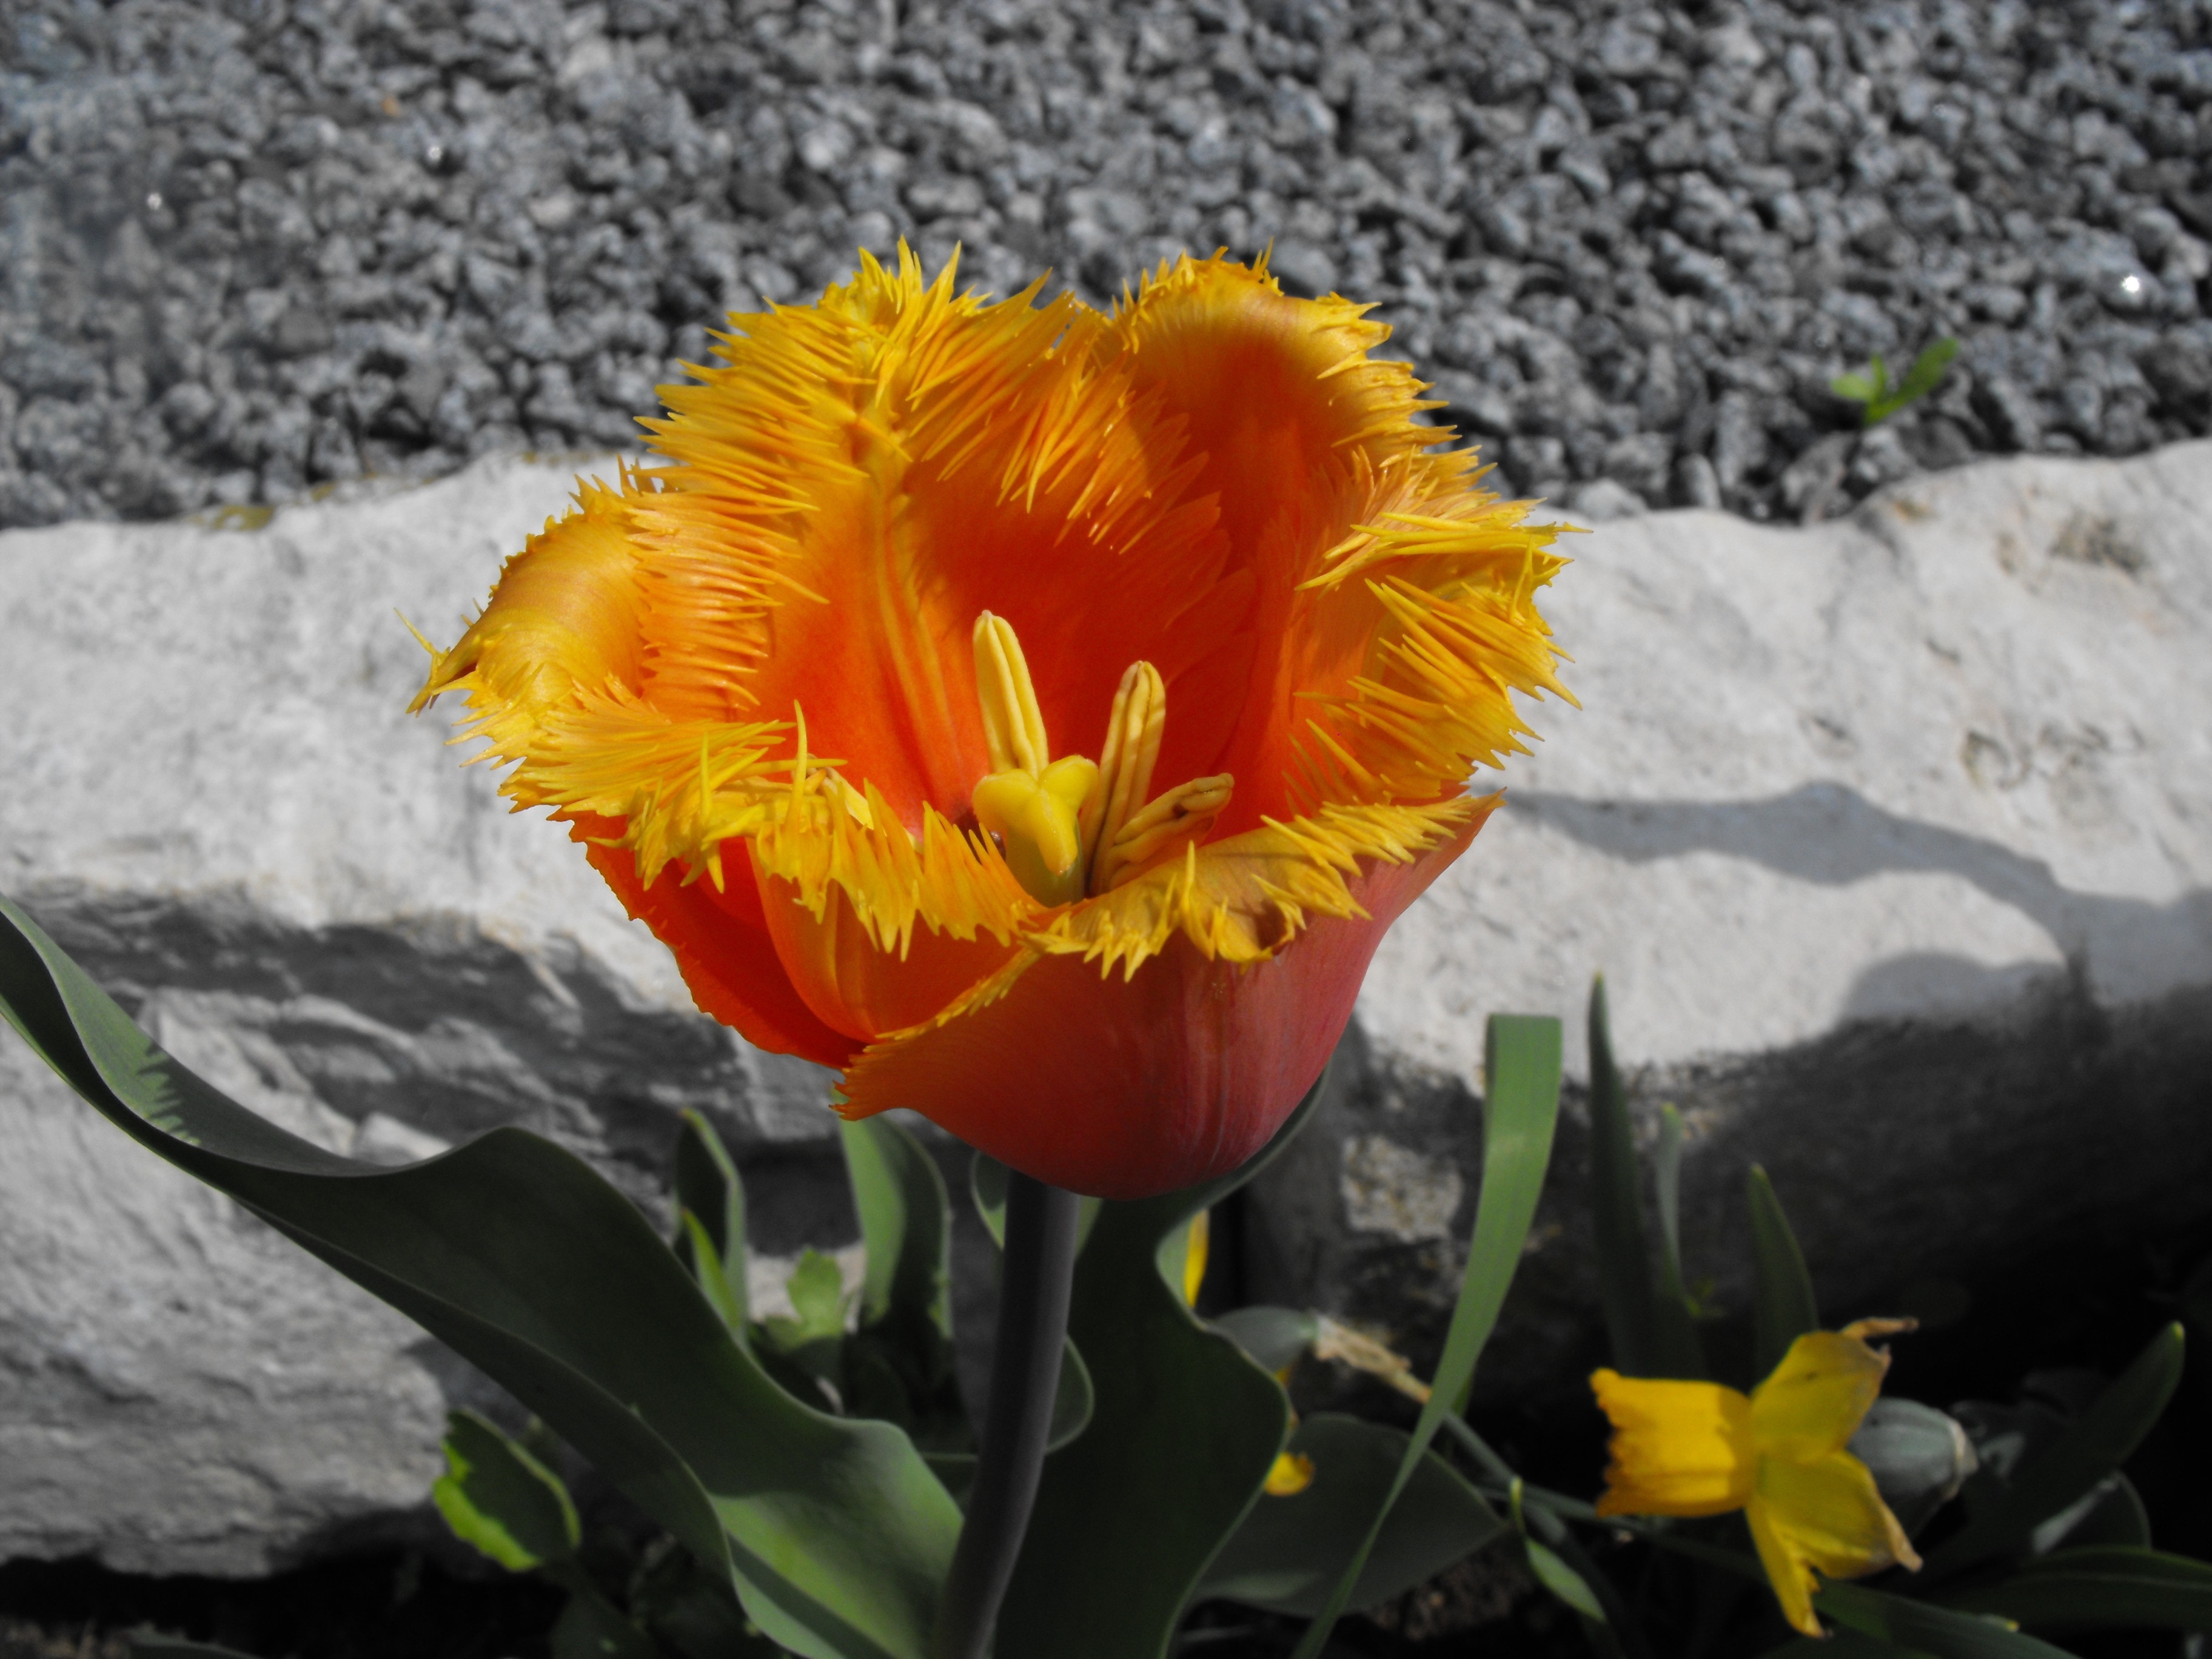 yellow and red petal flower